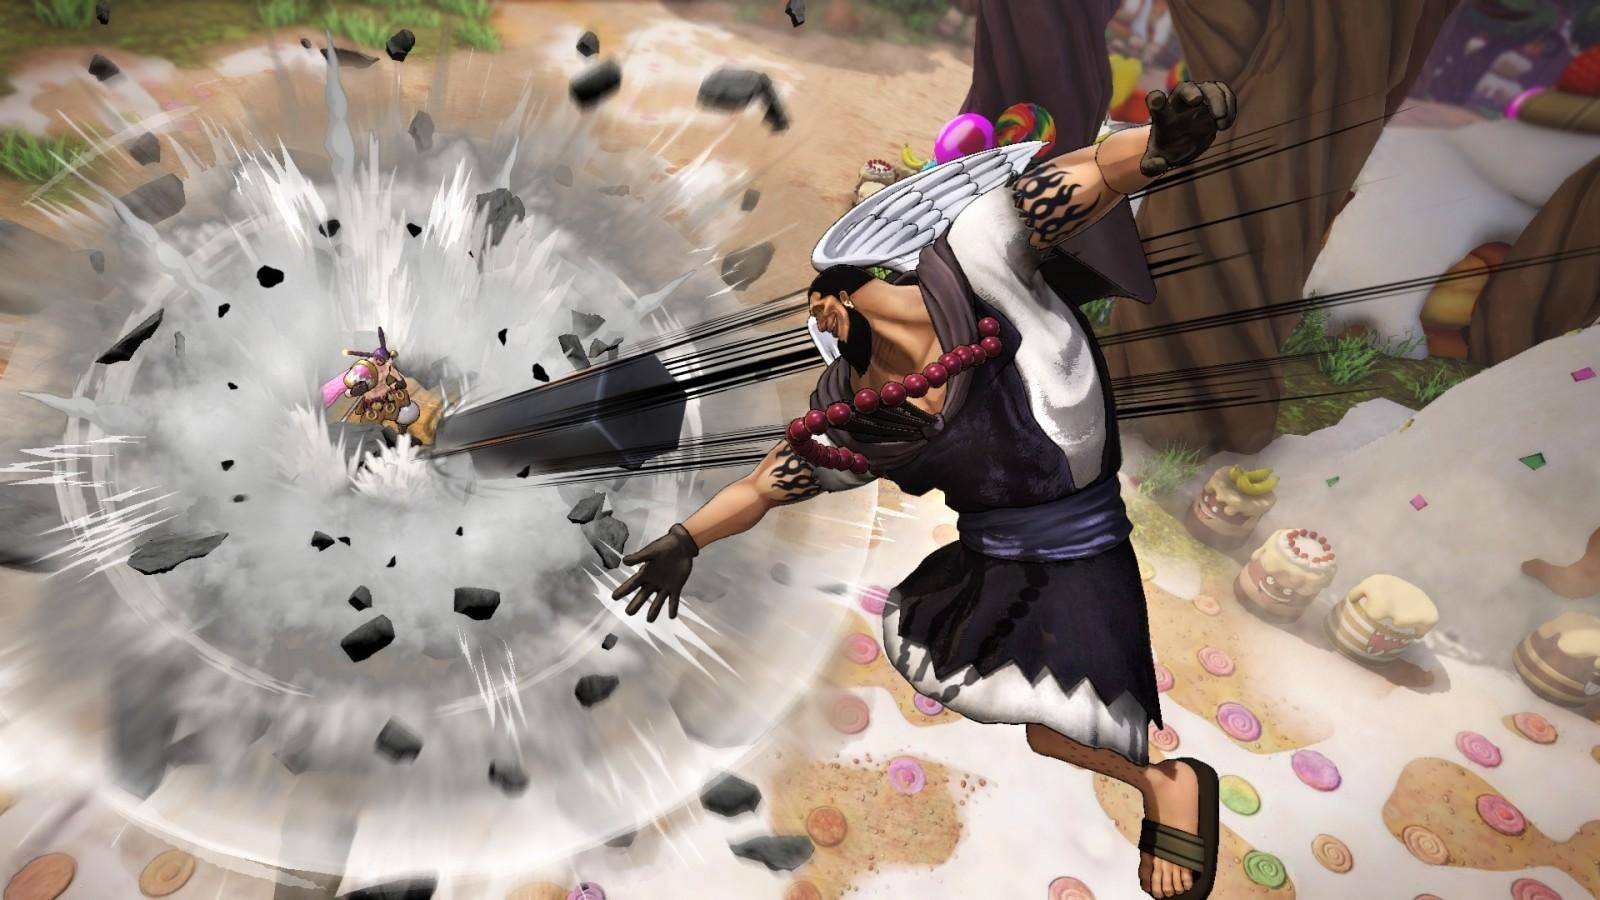 Urouge se une a One Piece: Pirate Warriors 4 4